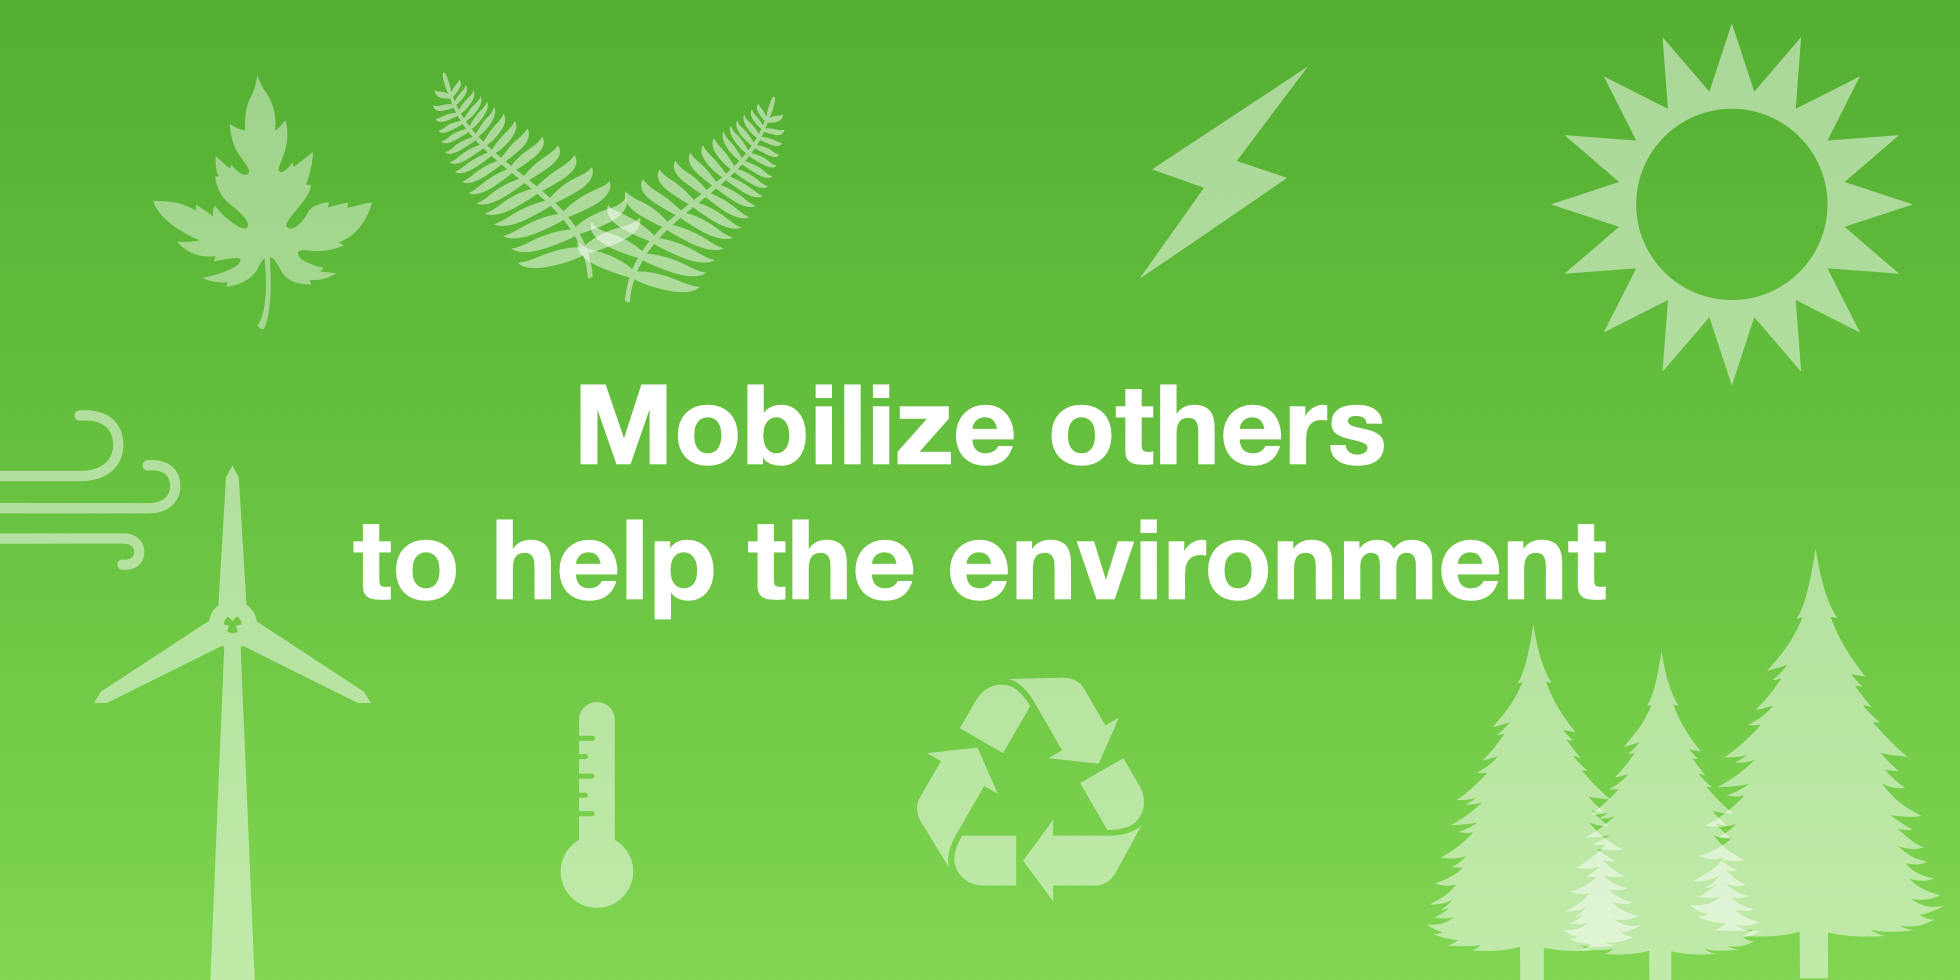 Text: "Mobilize others to help the environment" on a green background with environmental symbols surrounding it.